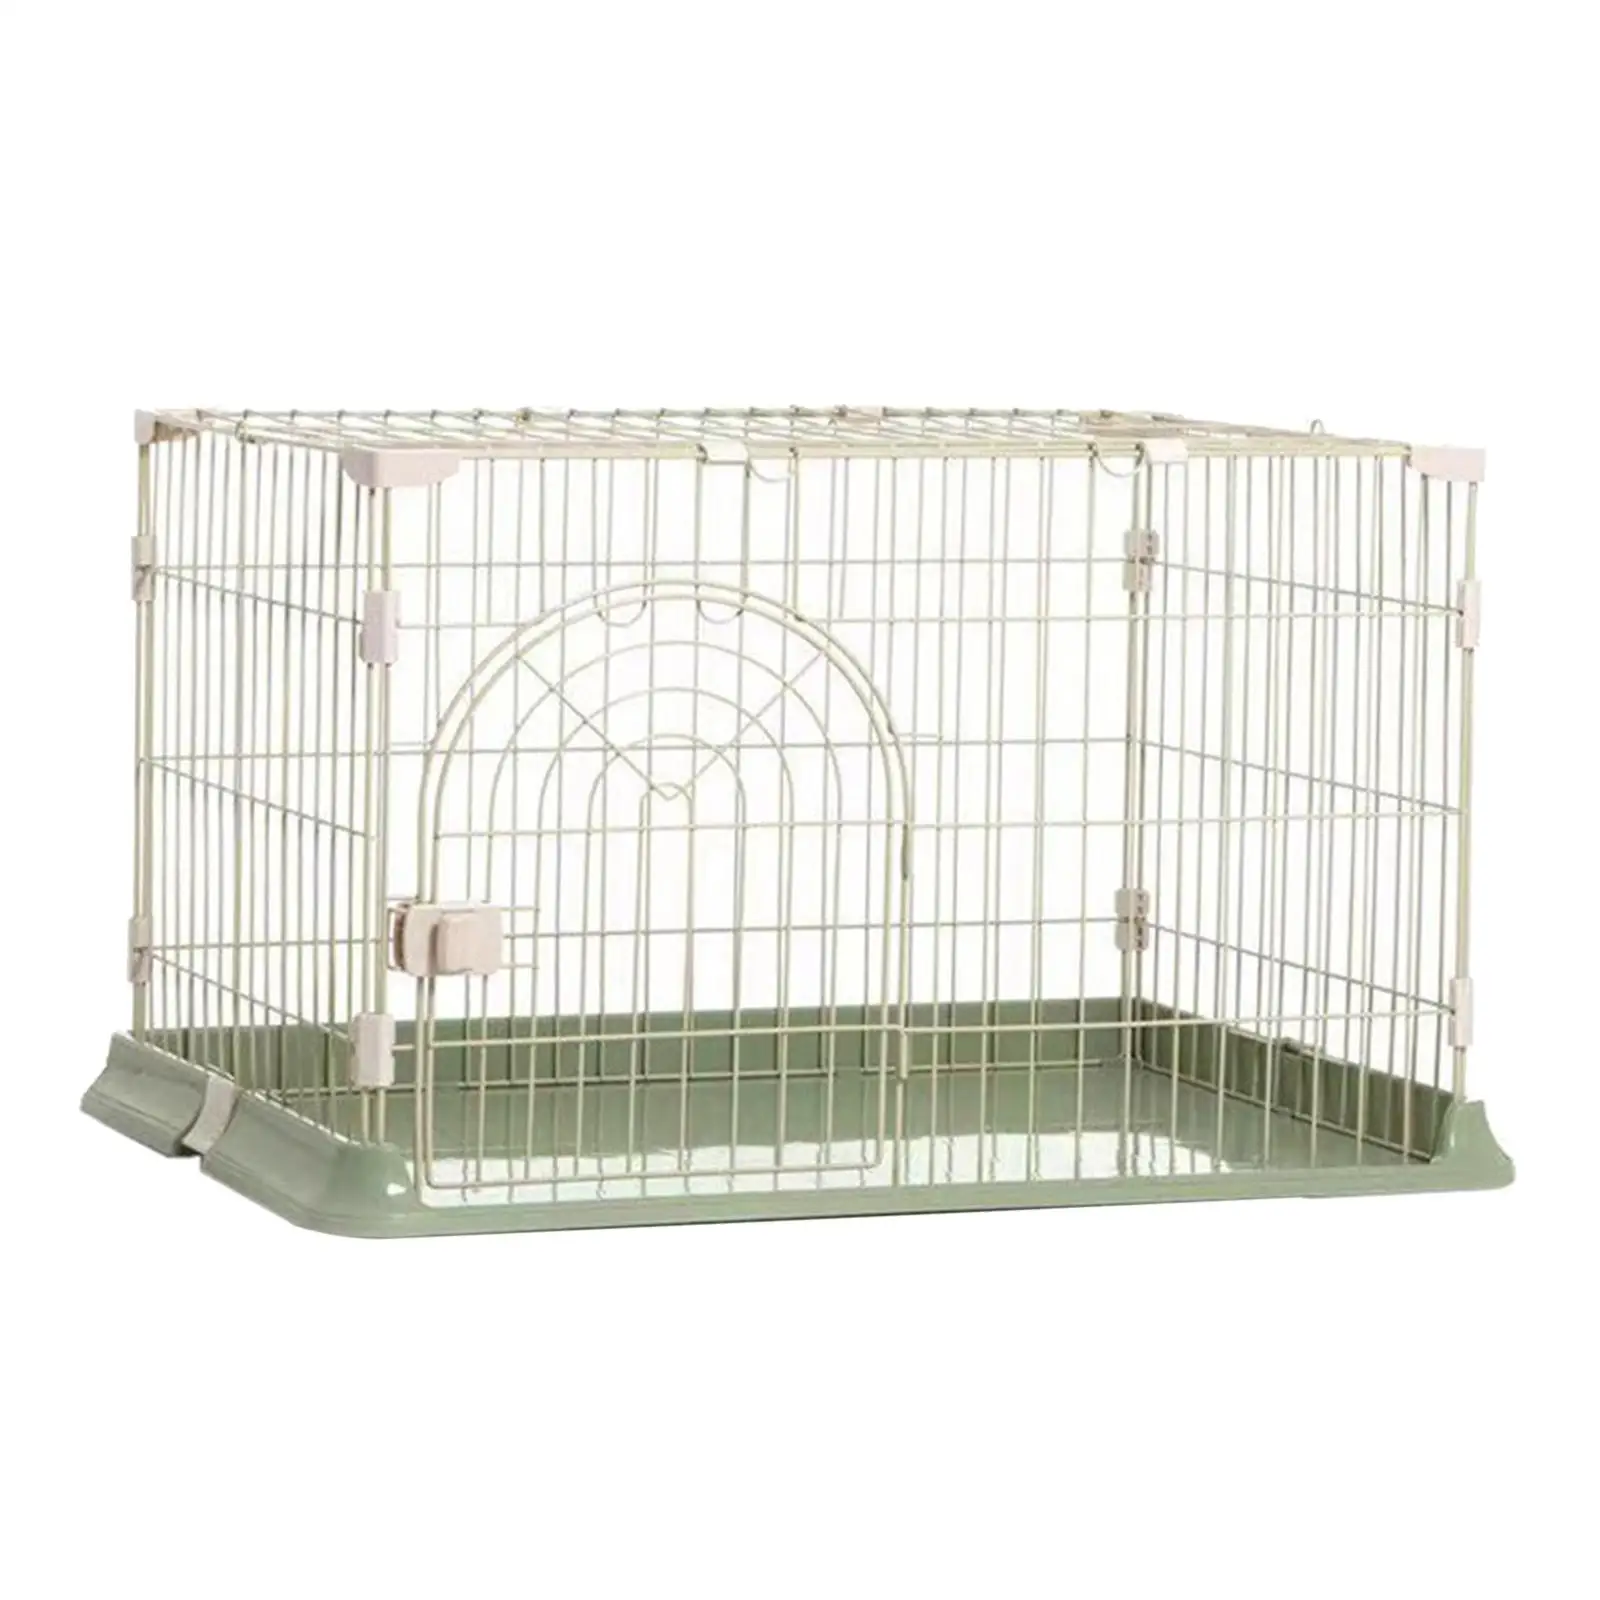 Dog Cage Dog Crate Cover Heavy Duty Reusable Portable Flat Door with Tray Box for Dogs Cat Travel Puppy Training Pet Carrier